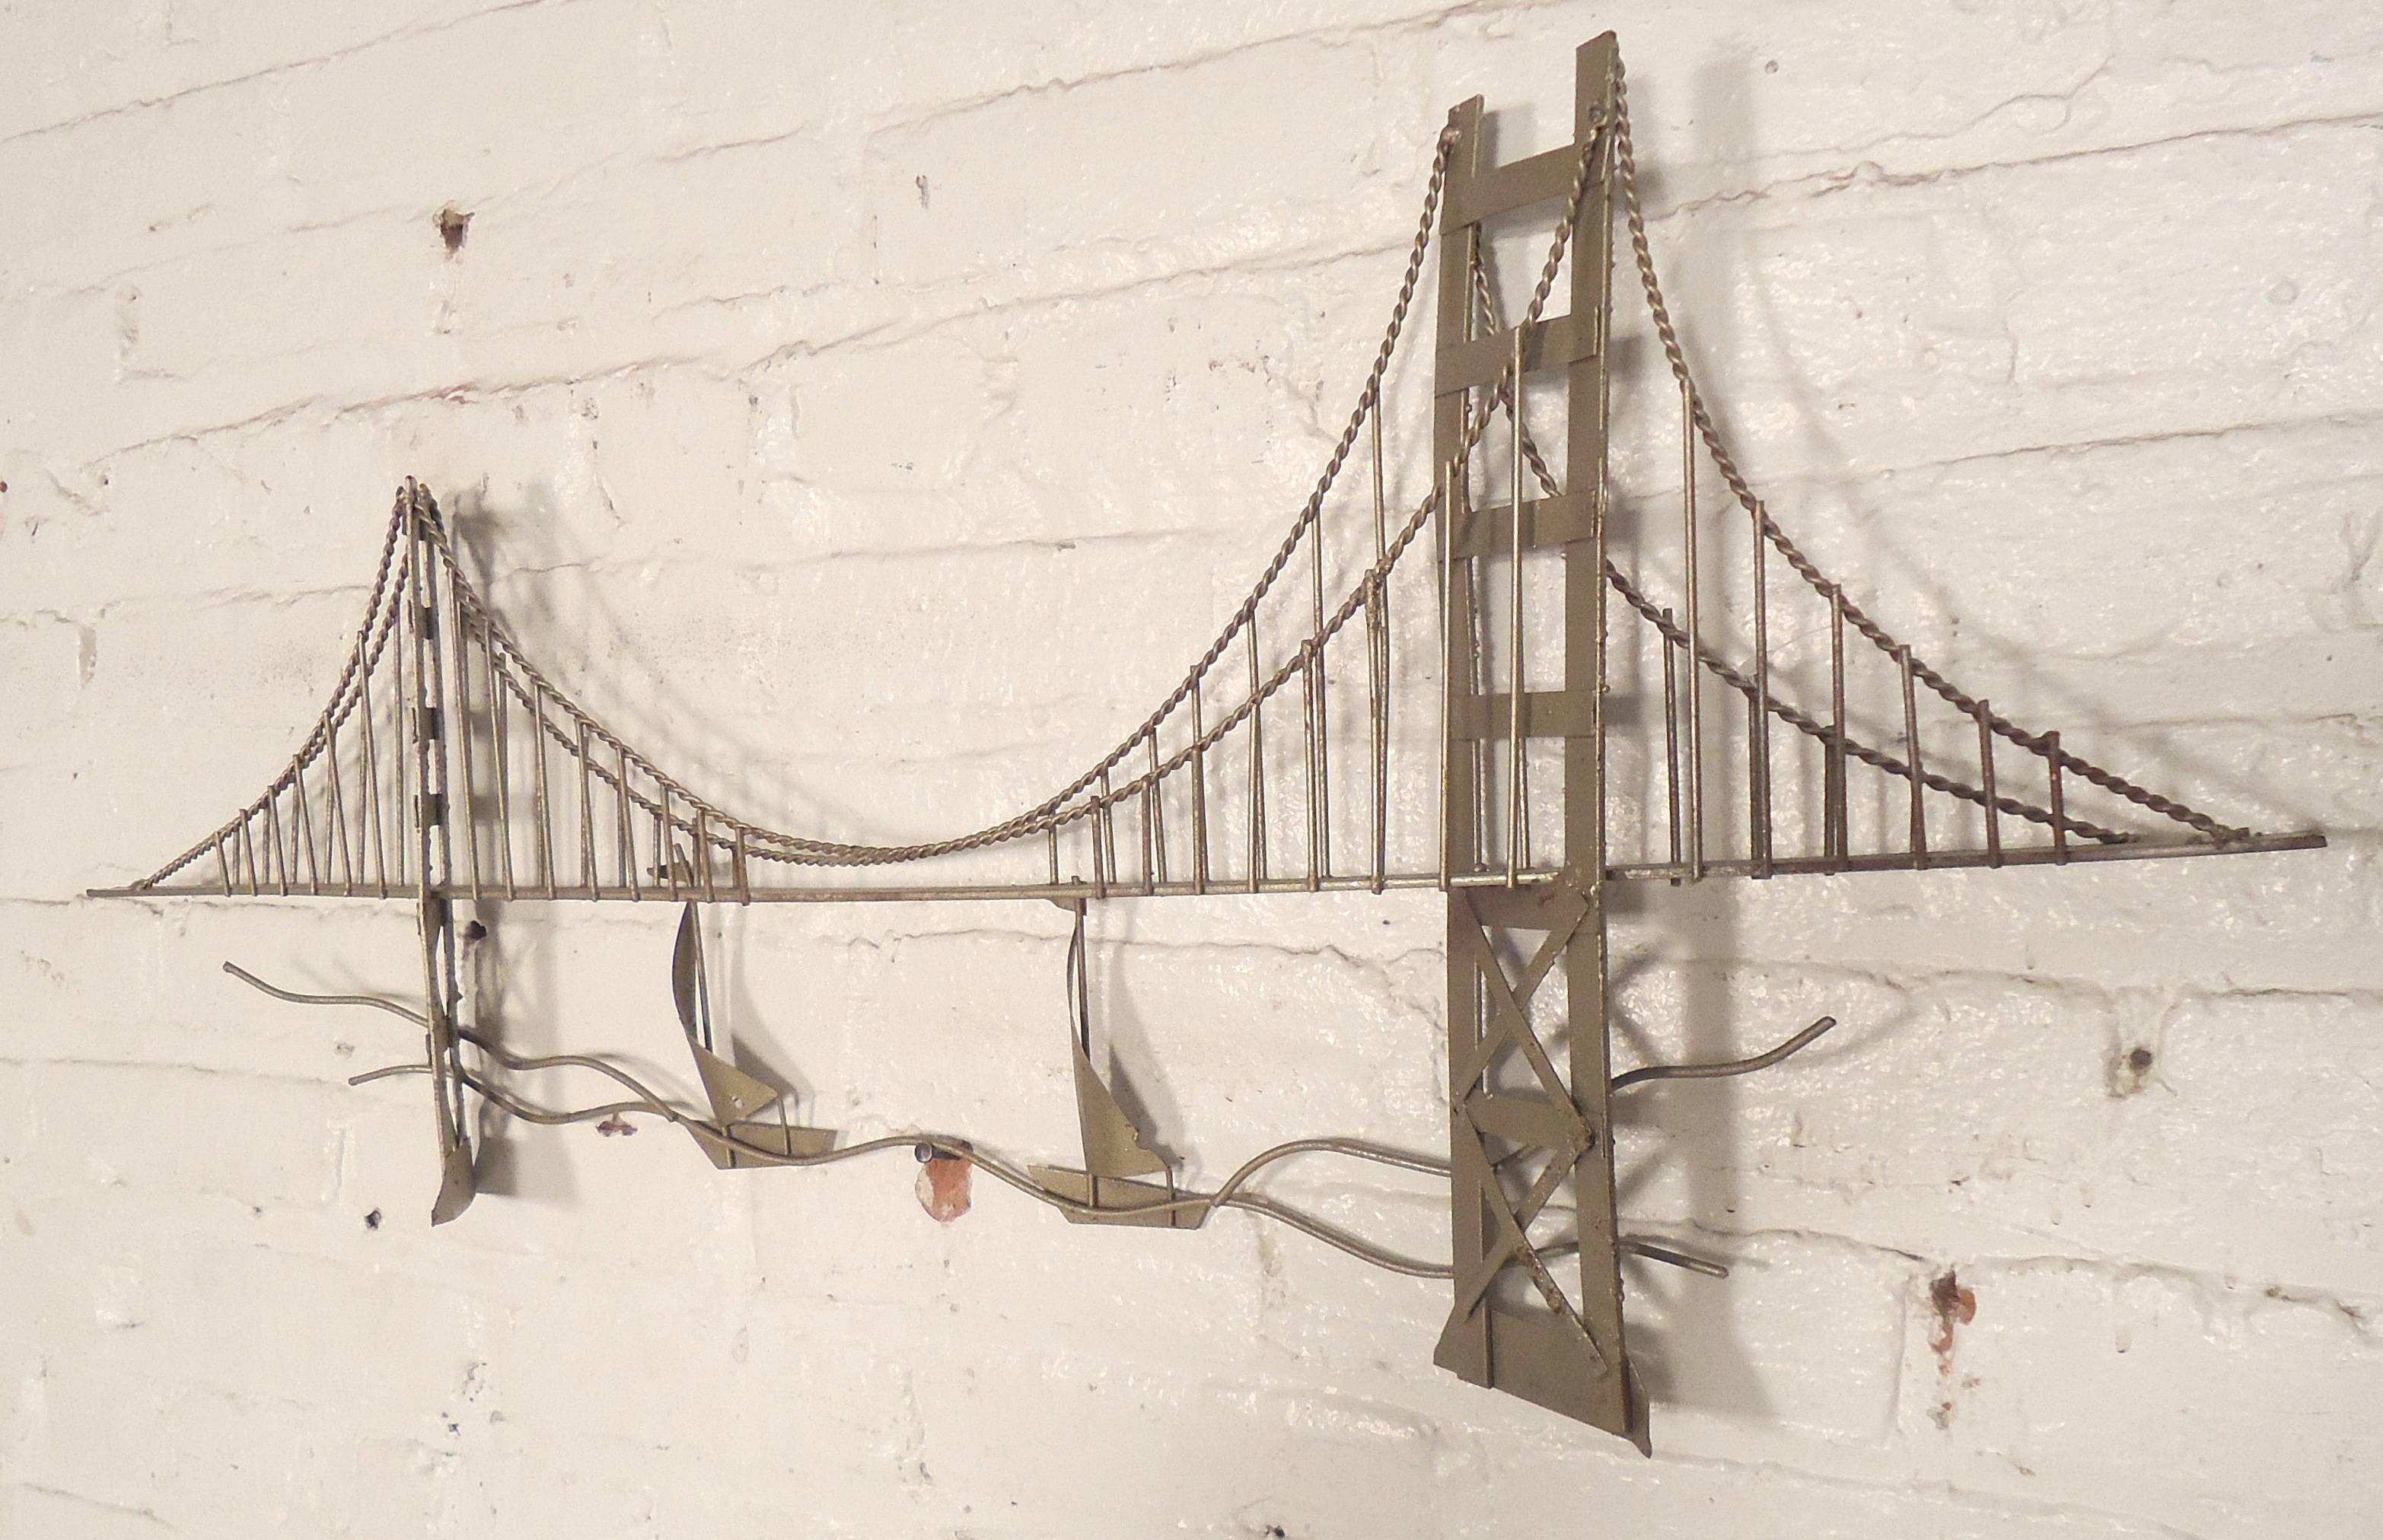 Metal bridge sculpture in brass coloring with boats and water. Designed after the Bay Bridge in San Fransisco and in the style of Curtis Jere.

(Please confirm item location - NY or NJ - with dealer).
    